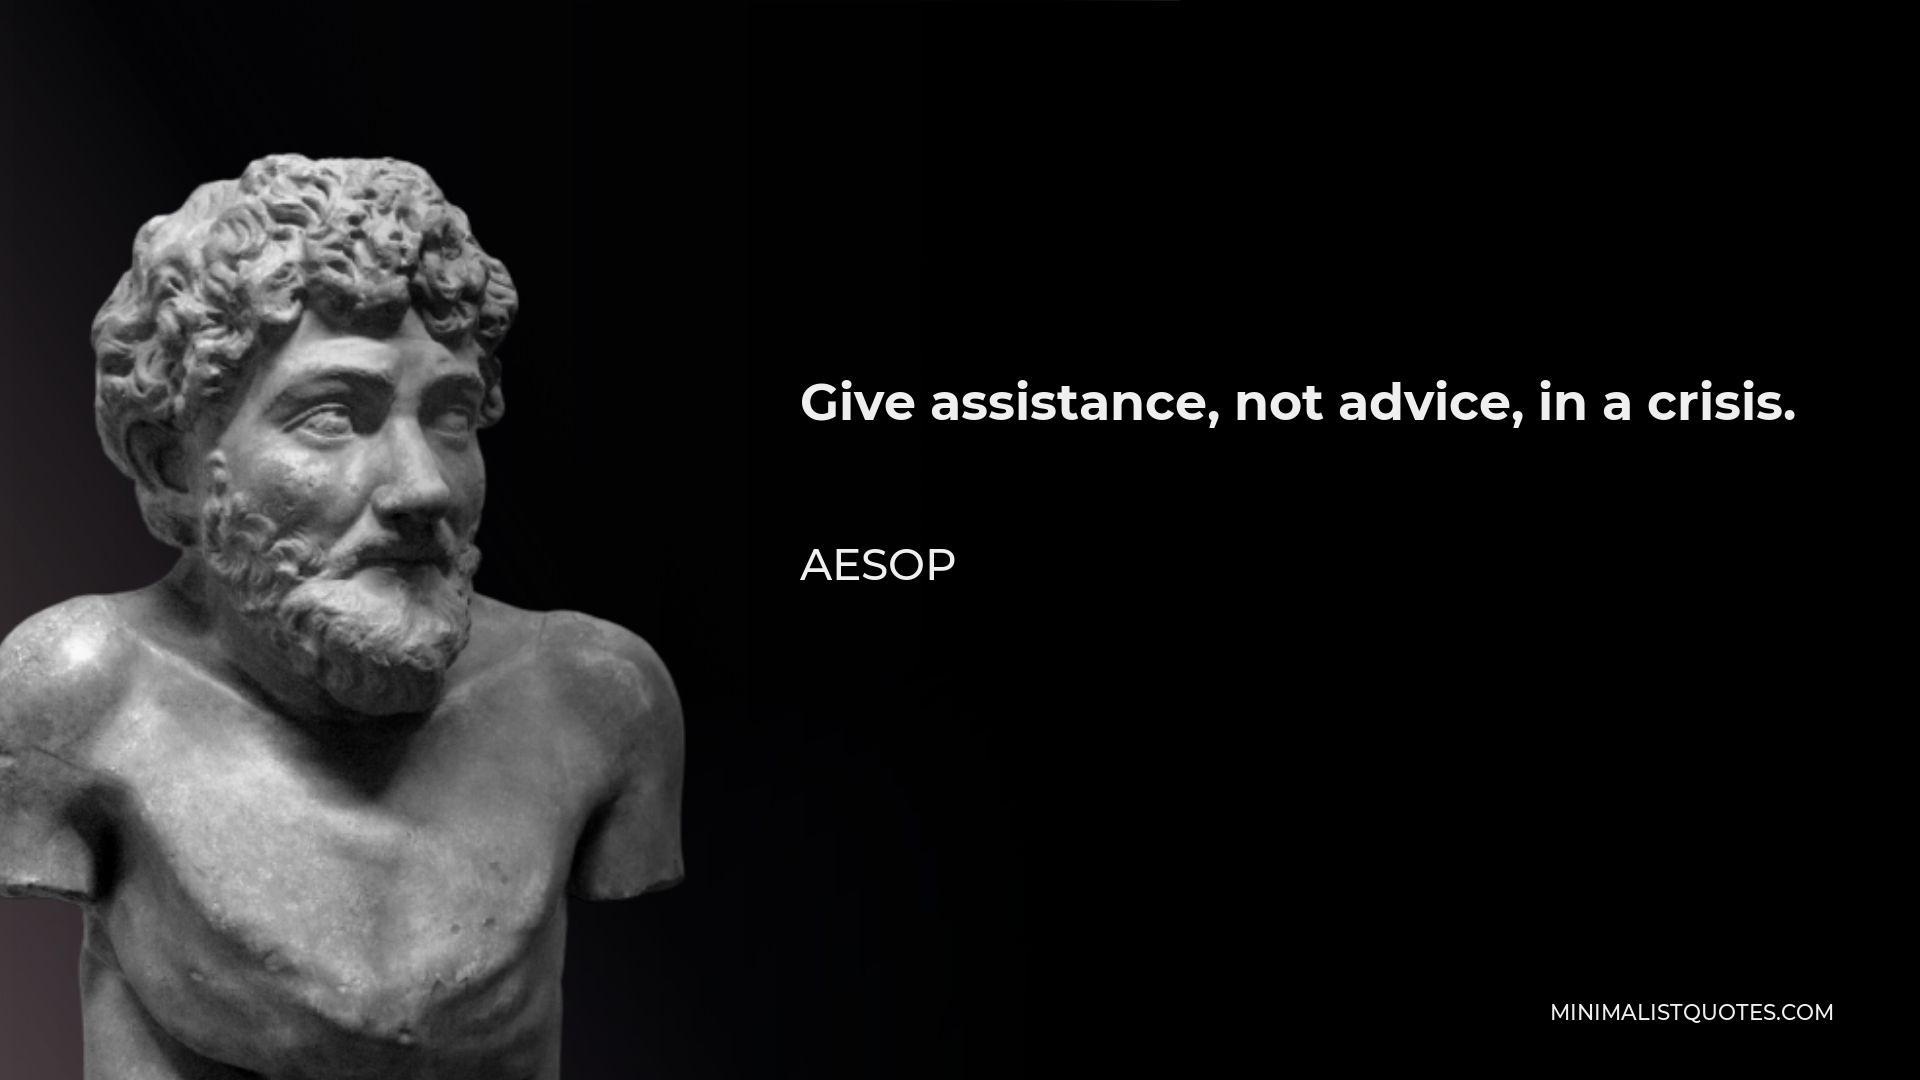 Aesop Quote - Give assistance, not advice, in a crisis.